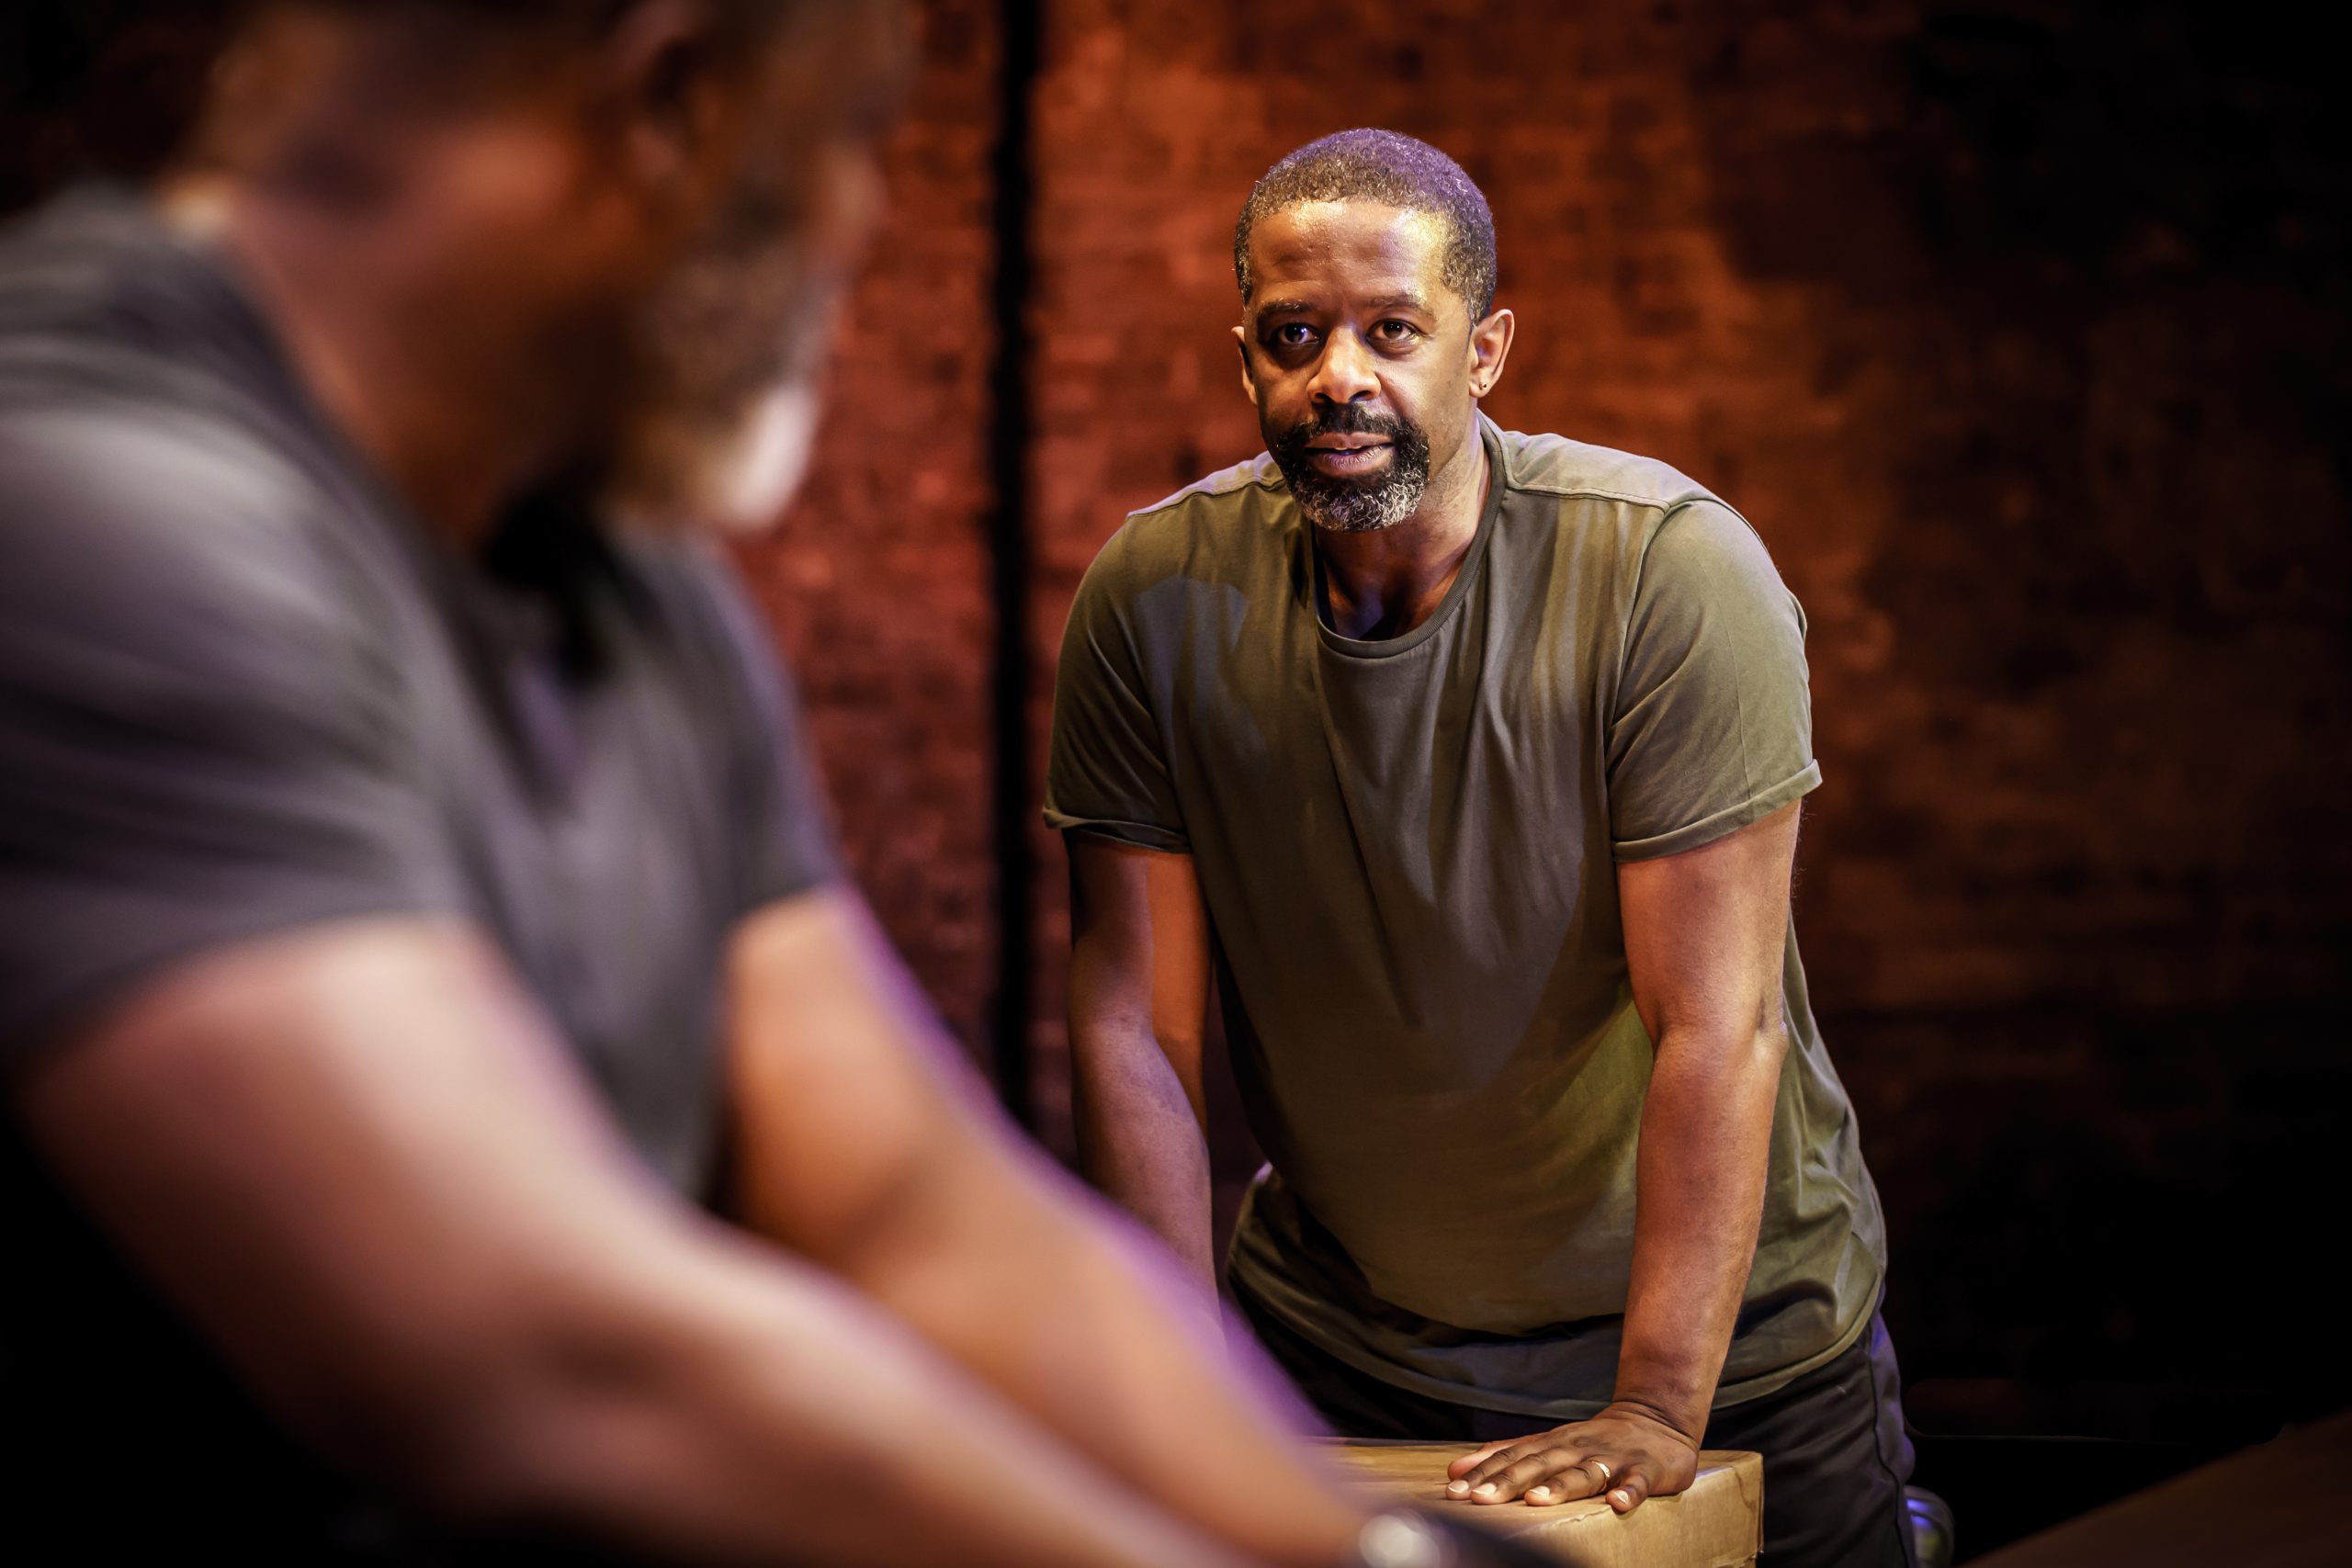 Hymn at the Almeida. Danny Sapani and Adrian Lester. Photo credit - Marc Brenner